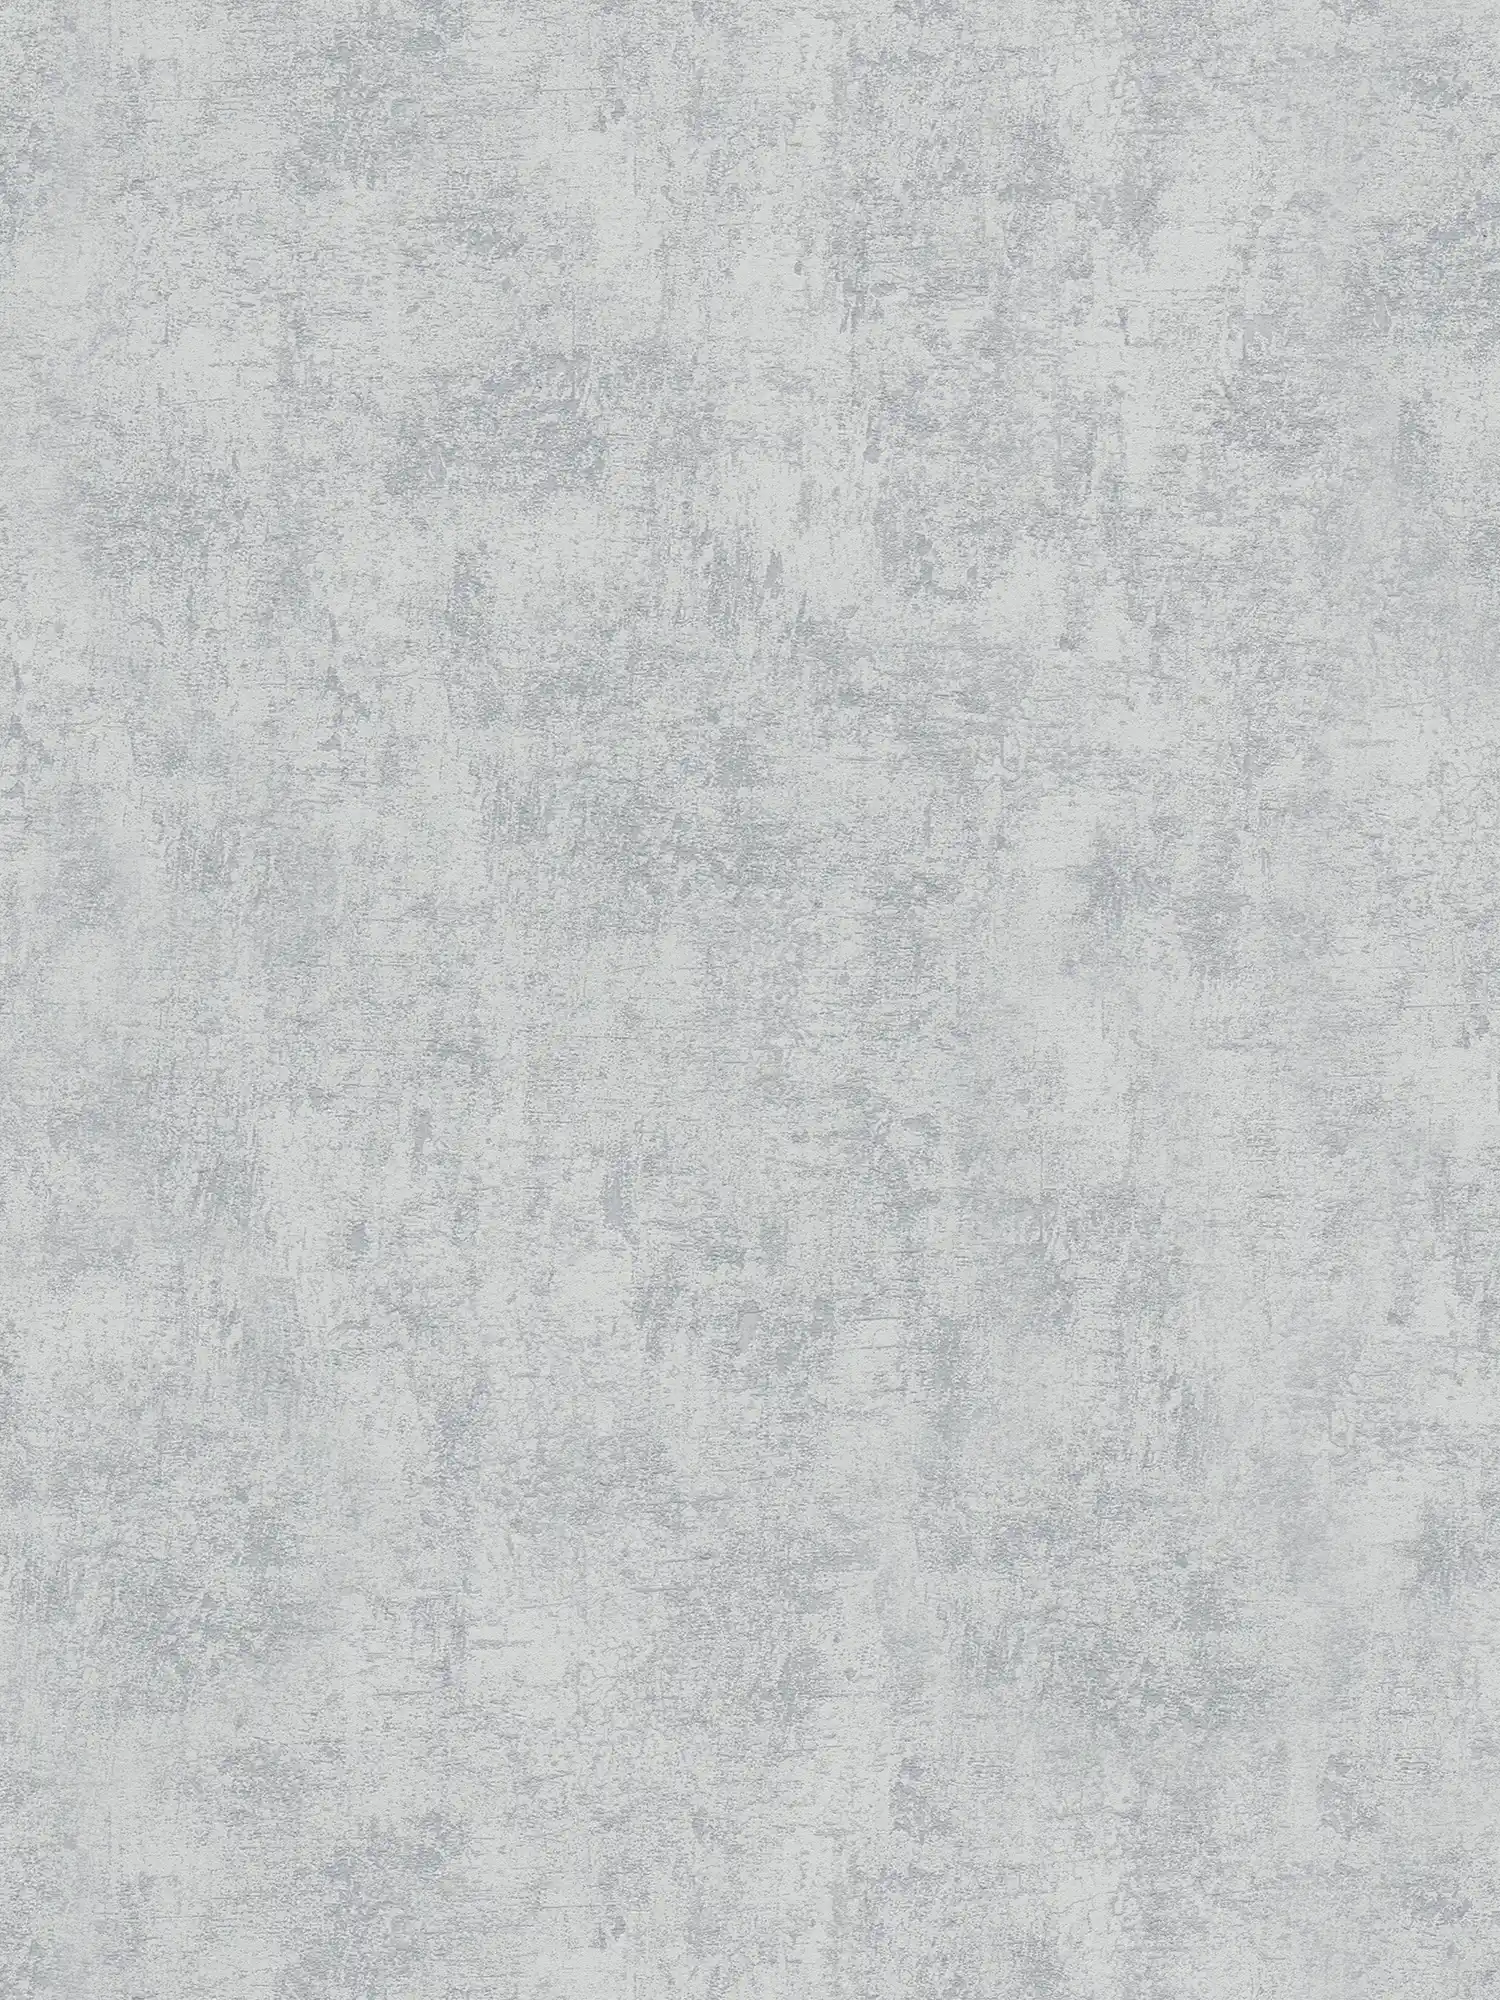 Wallpaper with concrete look in industrial style - grey
